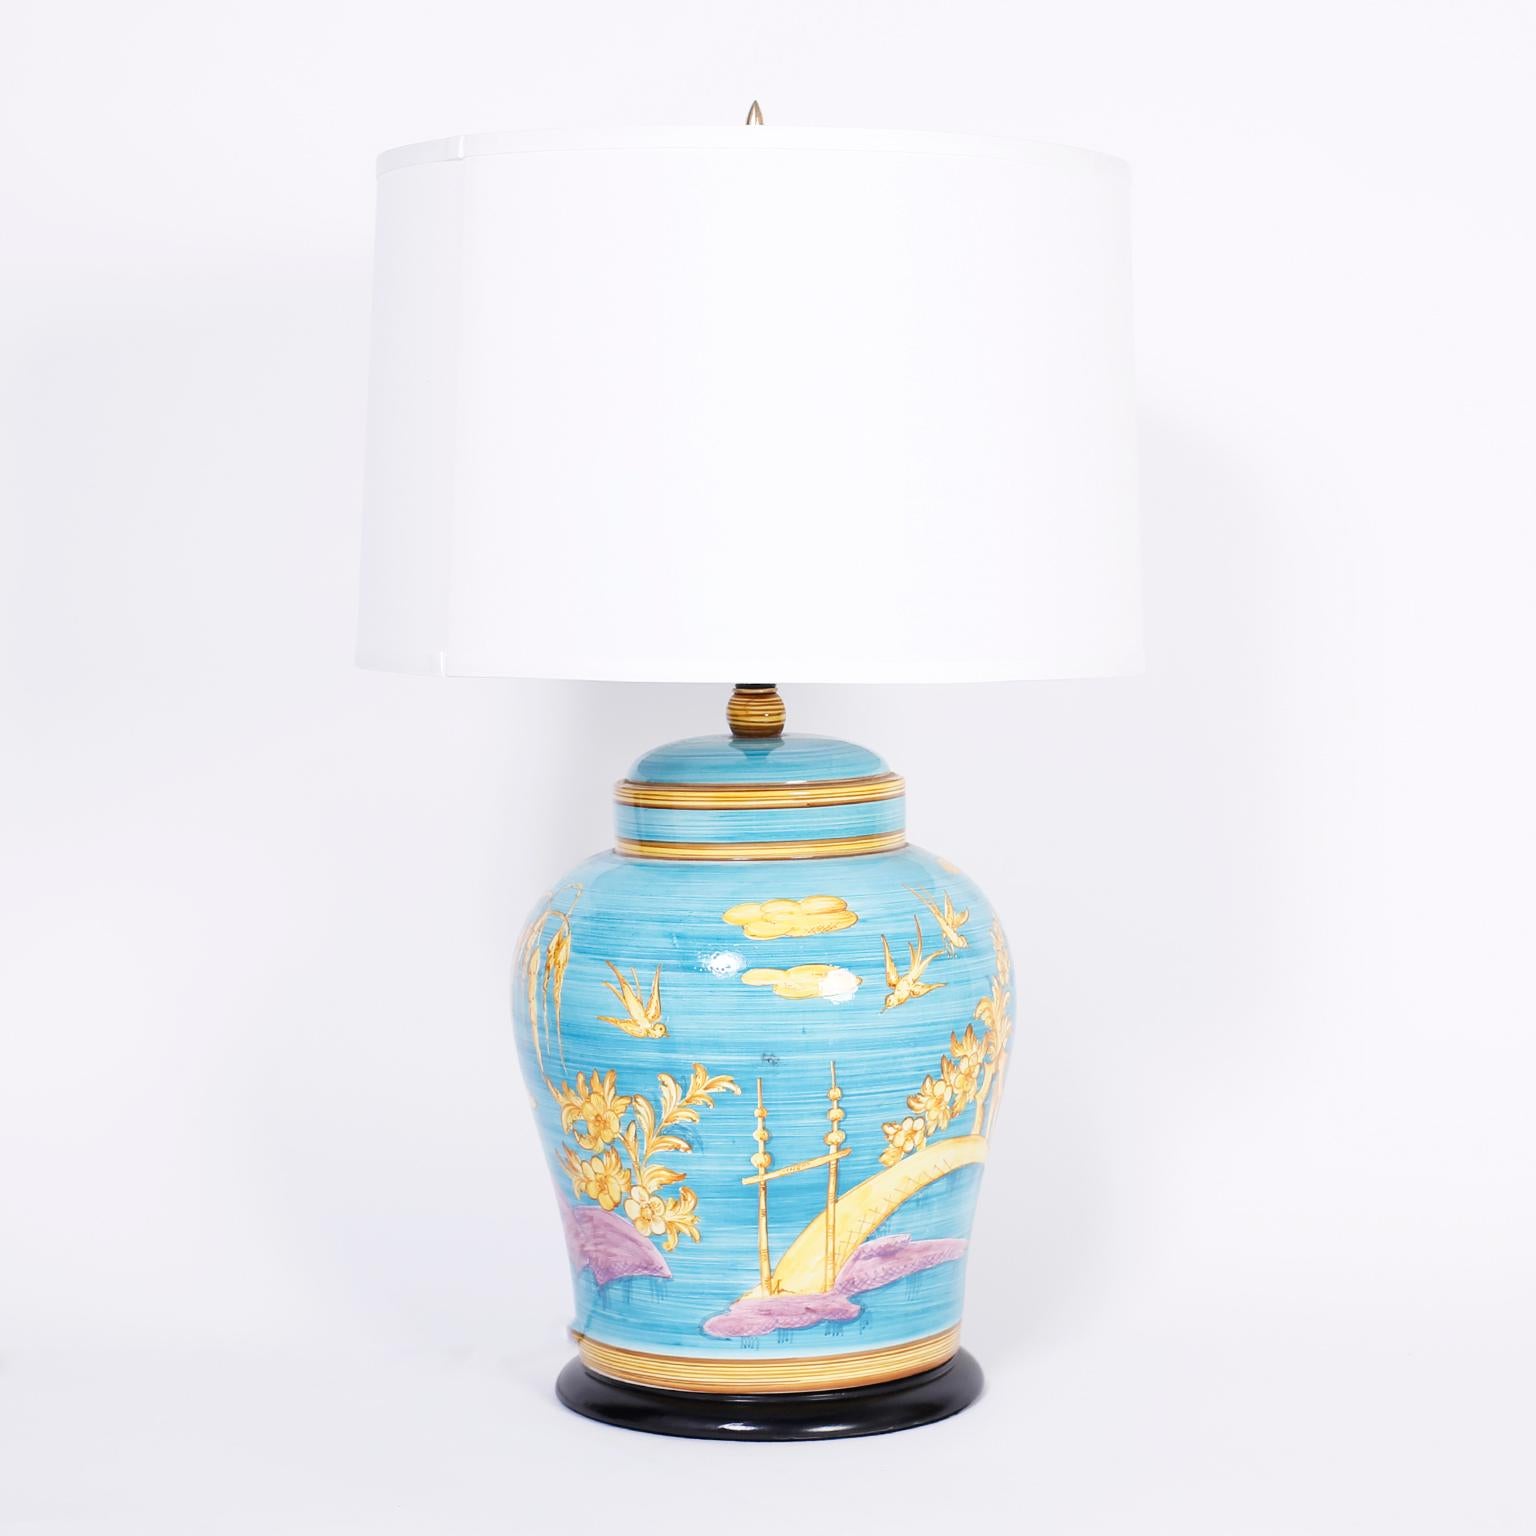 Pair of midcentury ceramic table lamps with a classic ginger jar form, decorated all around with bold chinoiserie designs in gold against an alluring turquoise background and set on black lacquered wood bases.